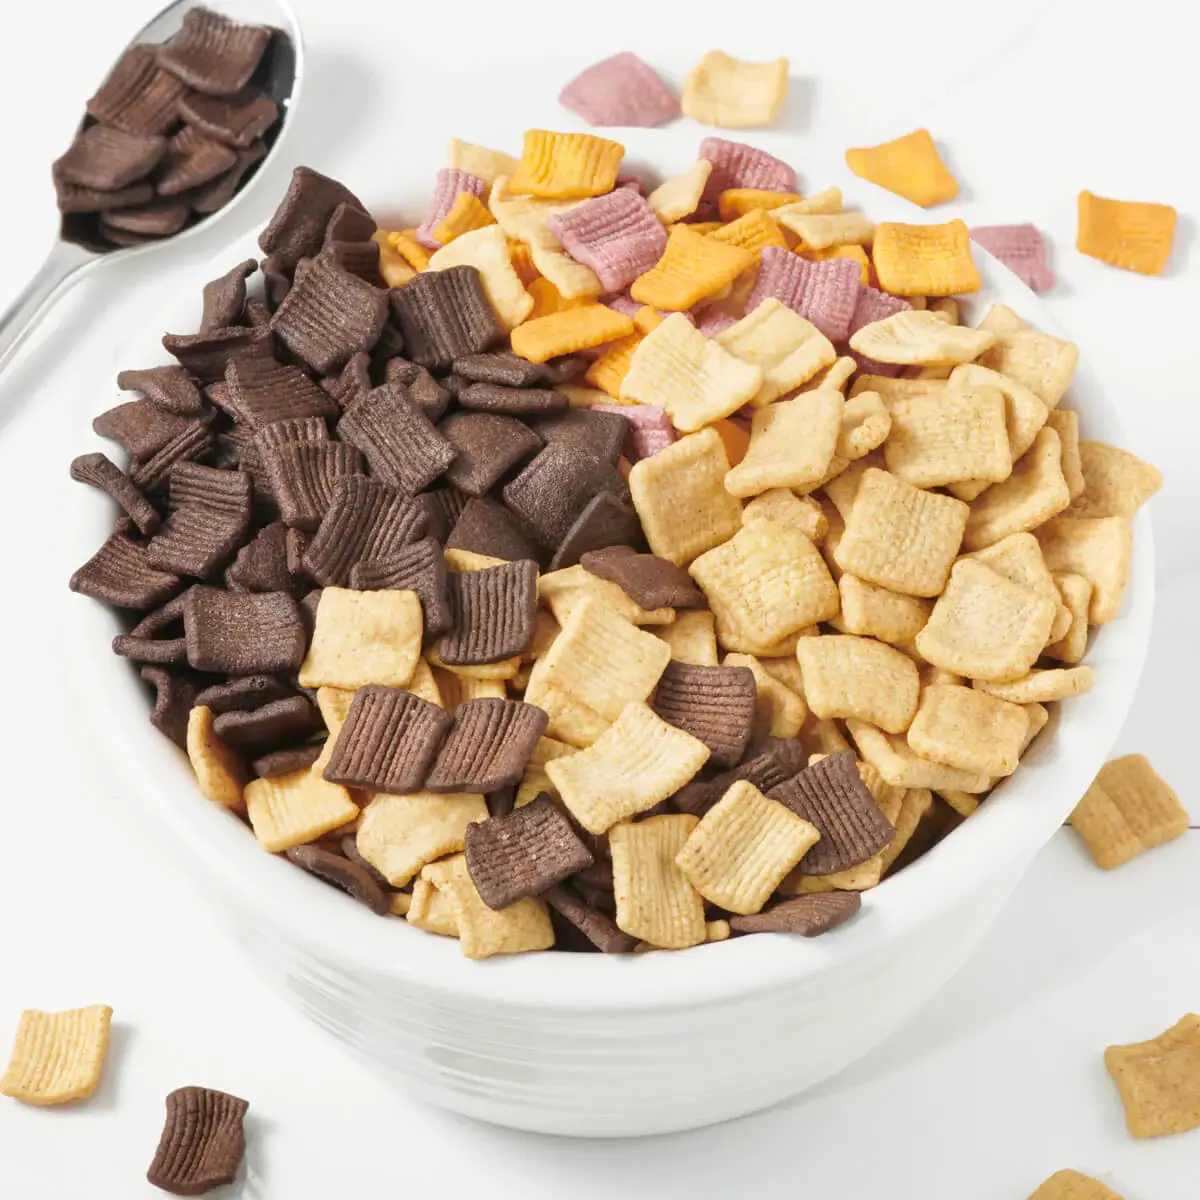 Catalina Crunch cereal in bowl